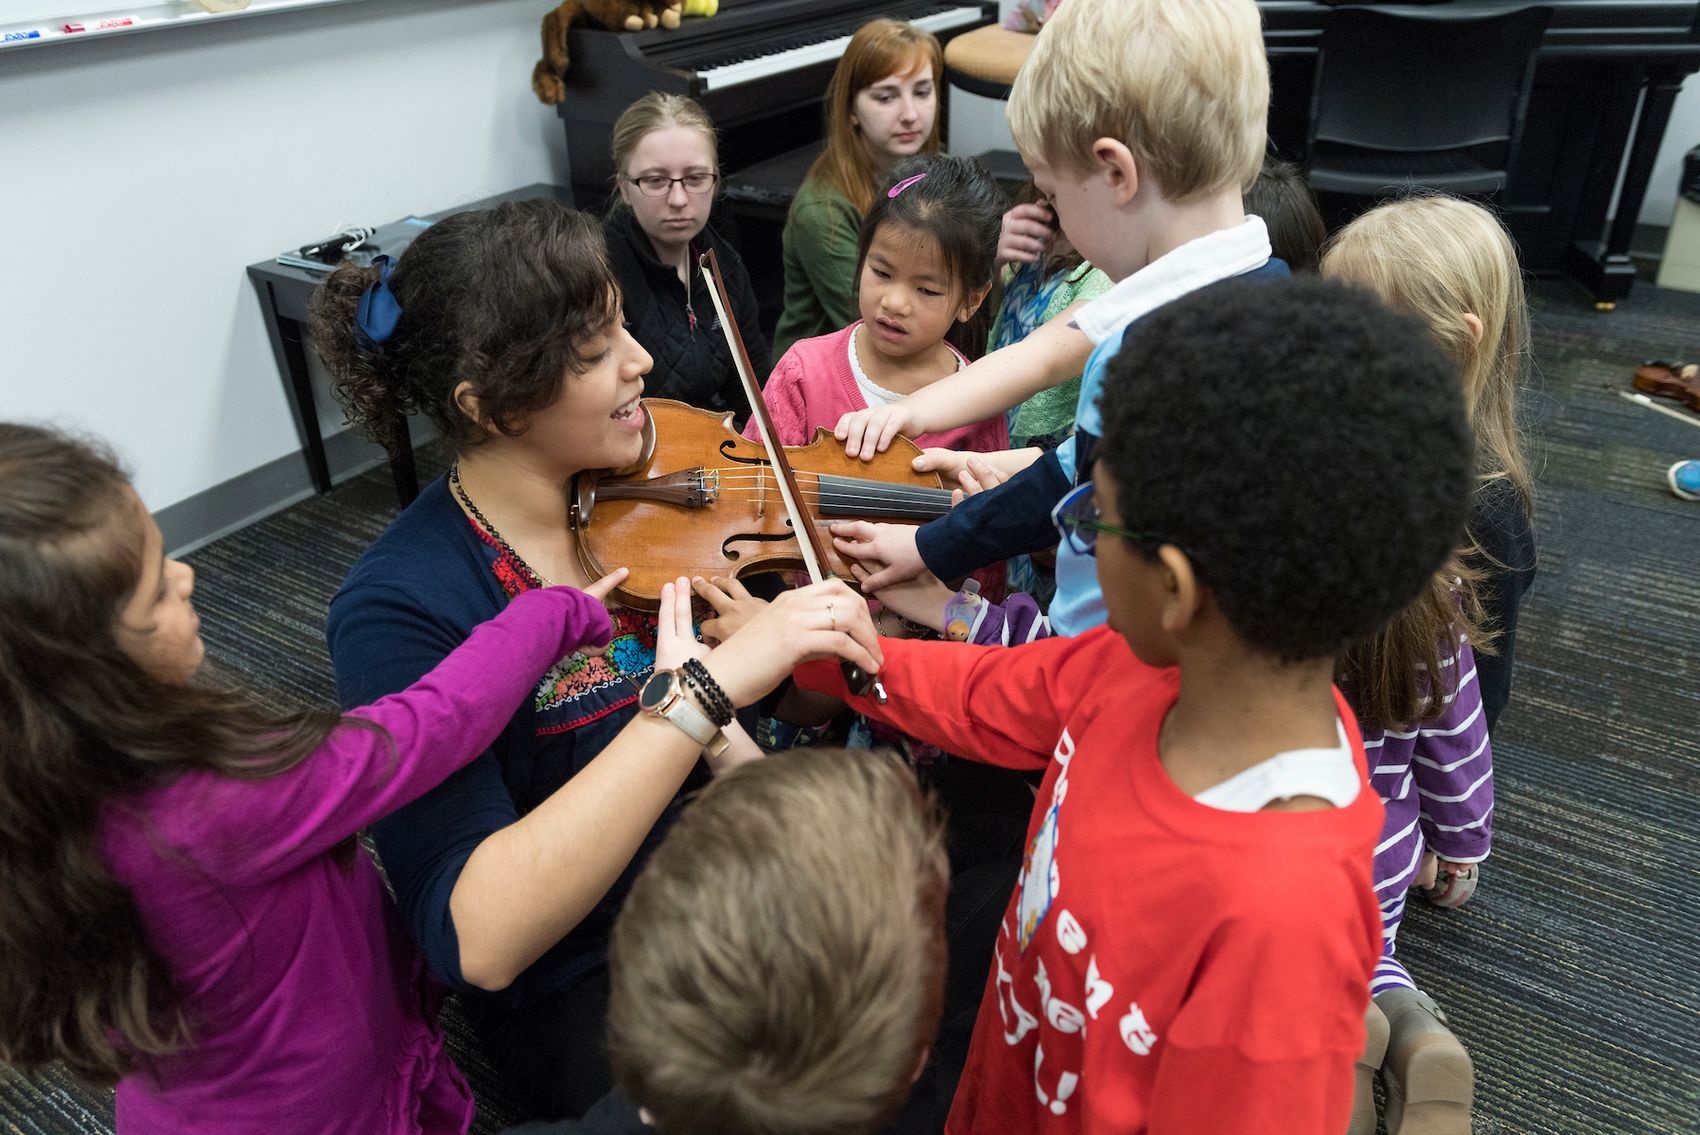 Marscia Martinez-Mendoza is a UNCW student who workds with students ages 4-60 to learn to play the violin.